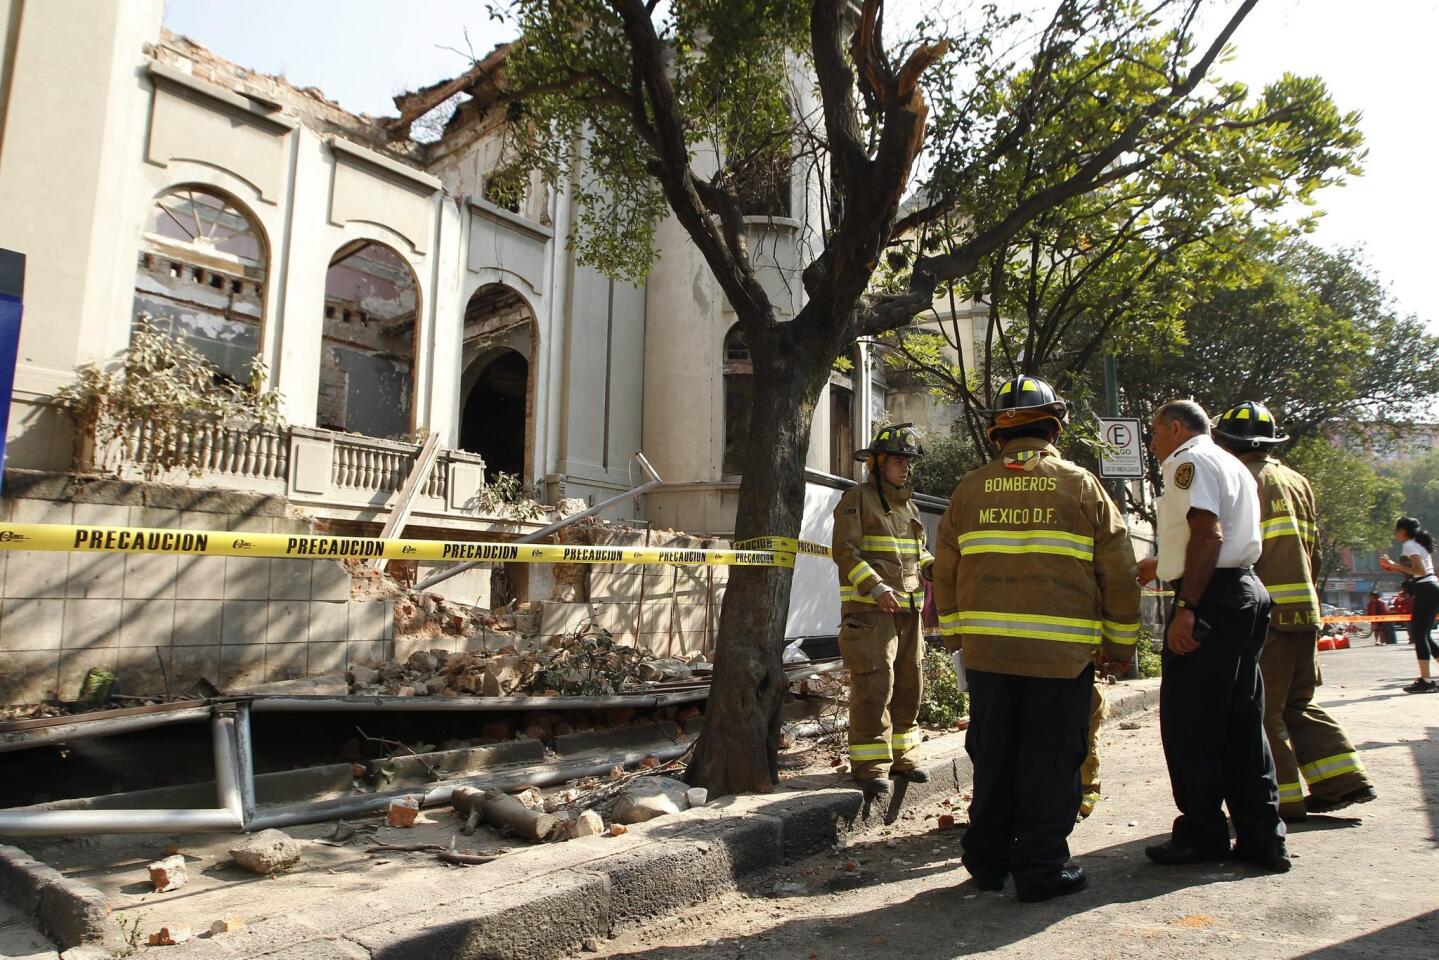 Firemen inspect a collapsed wall that is part of an old house after a 7.2 magnitude earthquake in Colonia Juarez neighborhood of Mexico City.